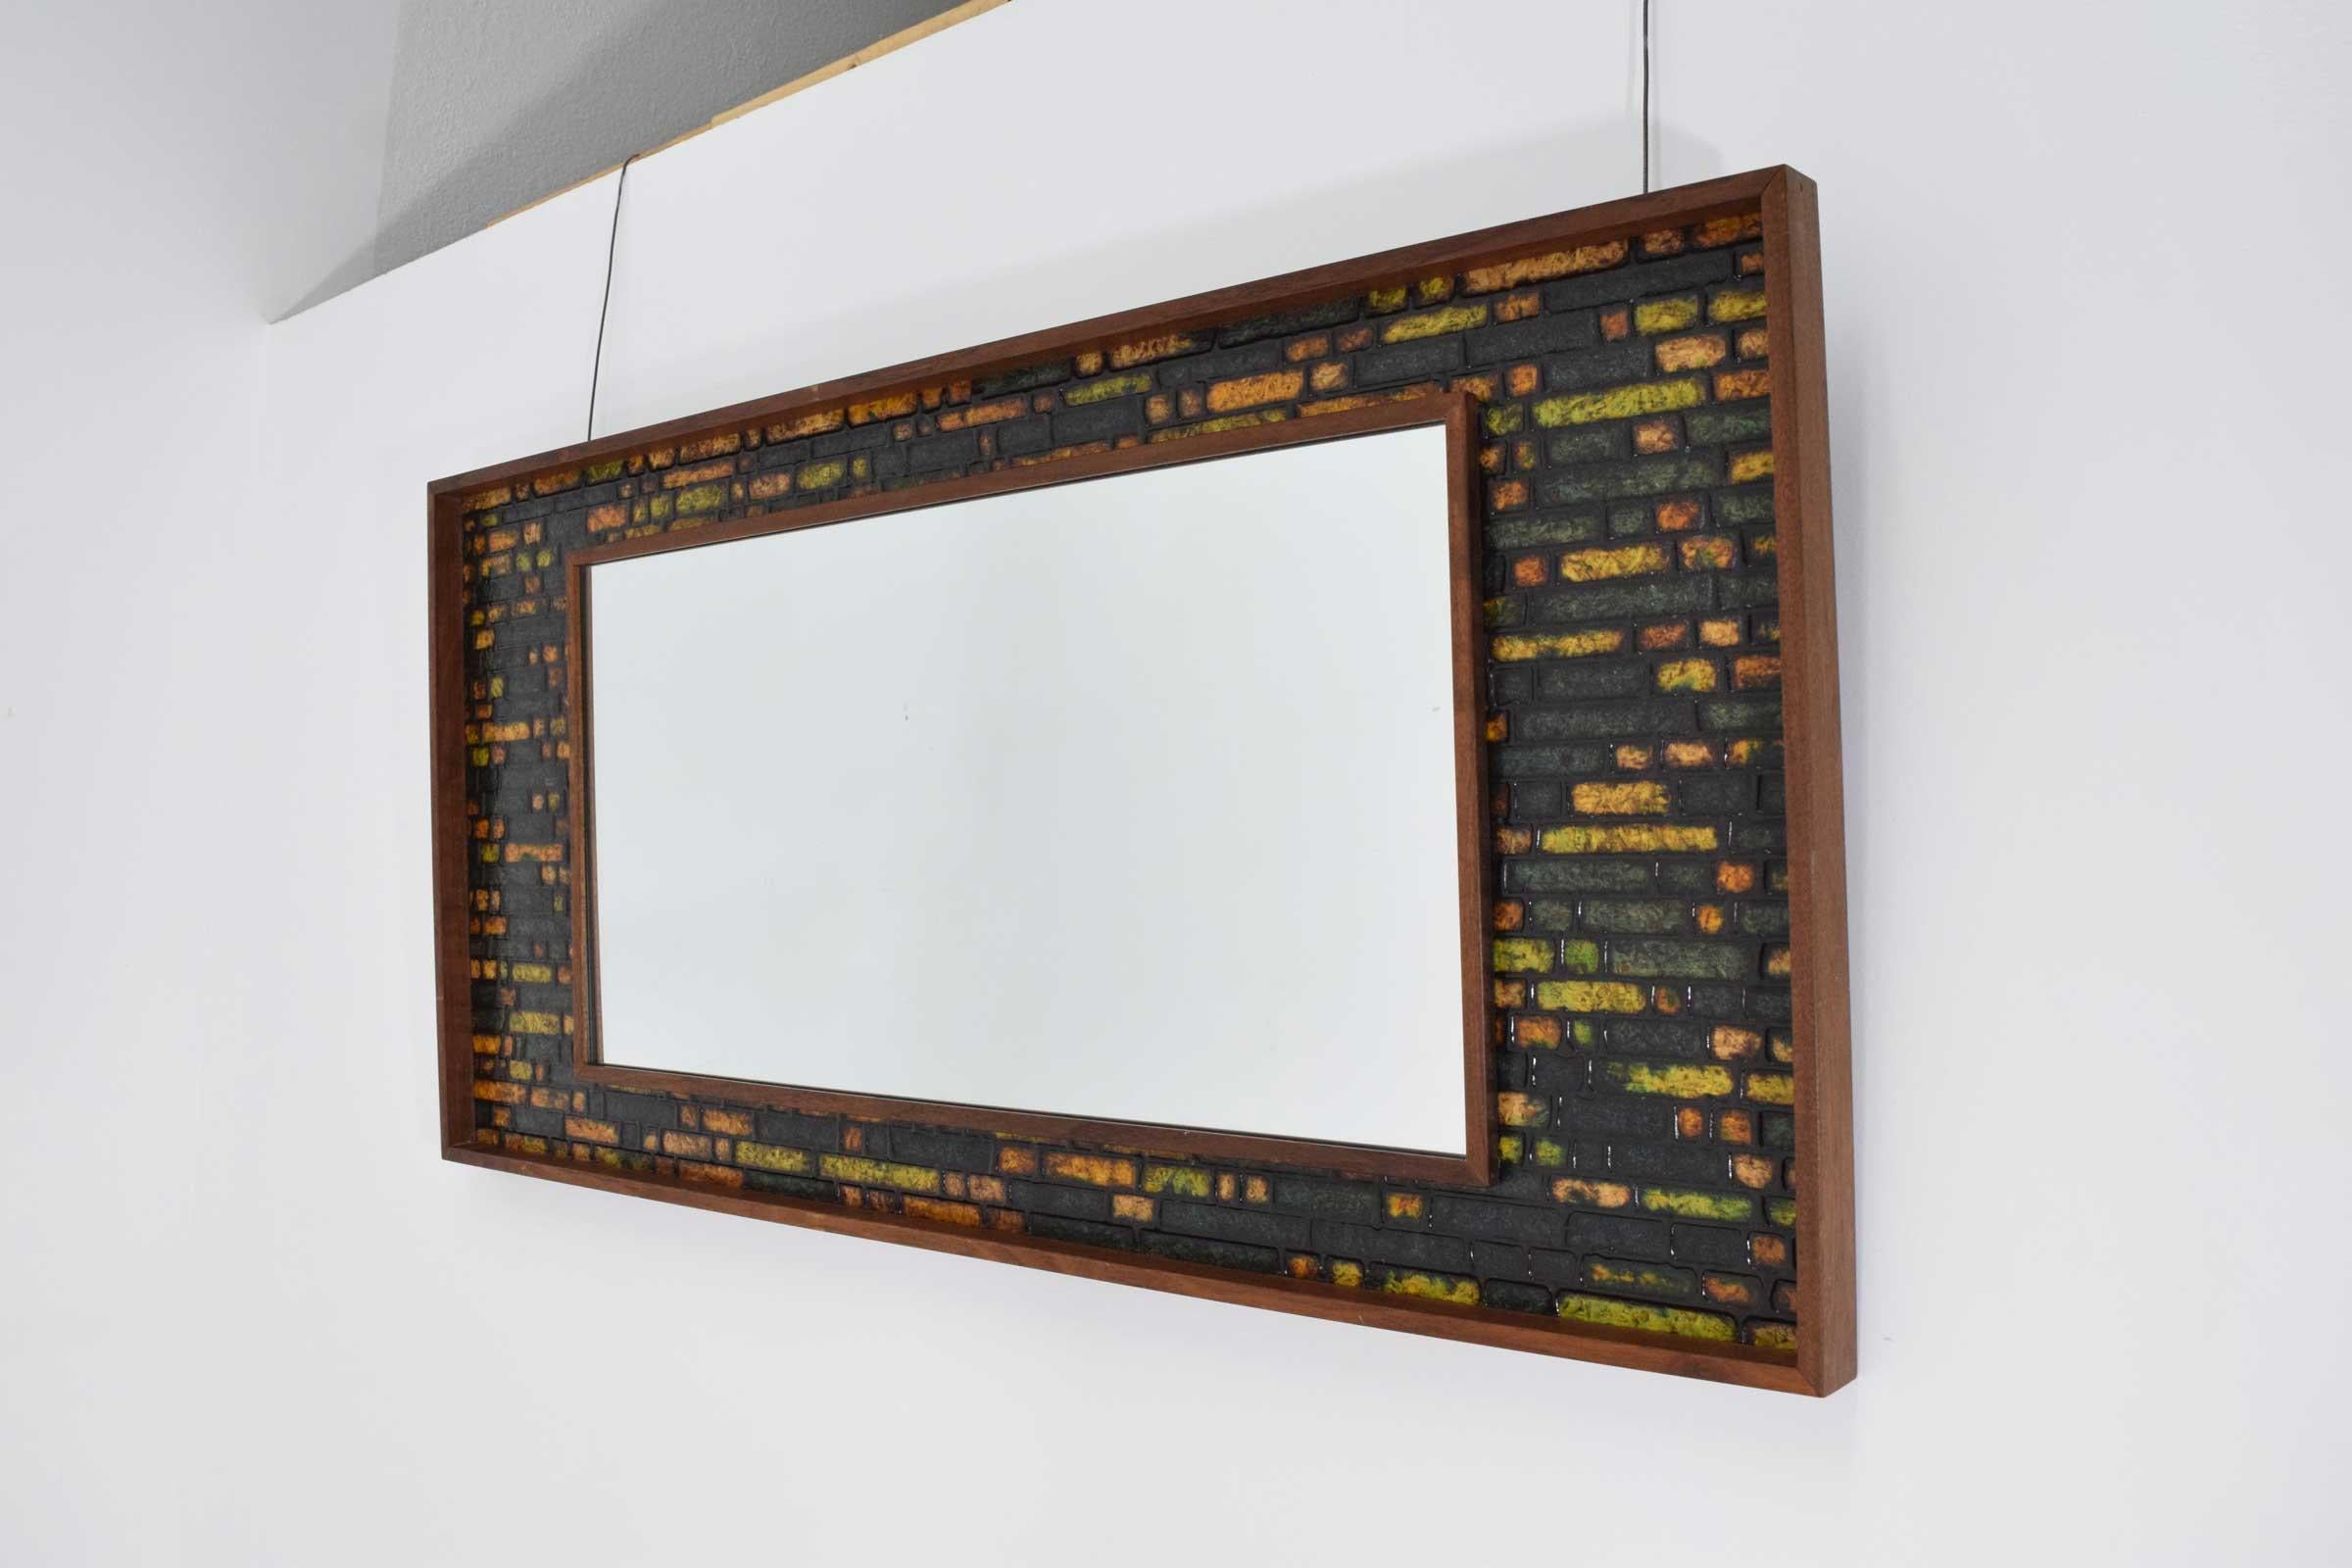 A nice mirror with tile like detail in greens, yellows, black and oranges. Walnut or teak frame. Can hang vertical or horizontal.